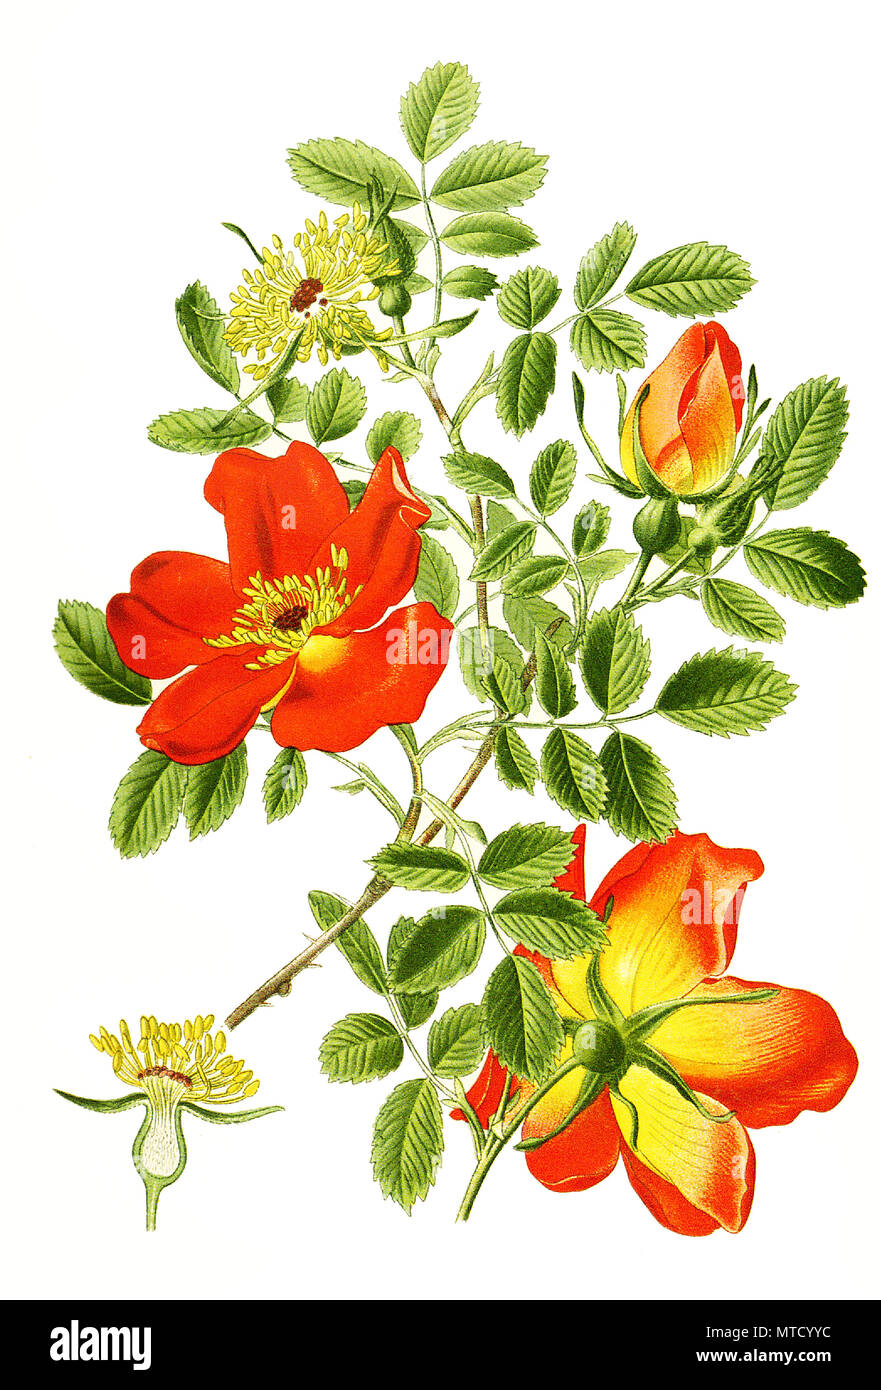 Rosa Foetida Rose High Resolution Stock Photography and Images - Alamy